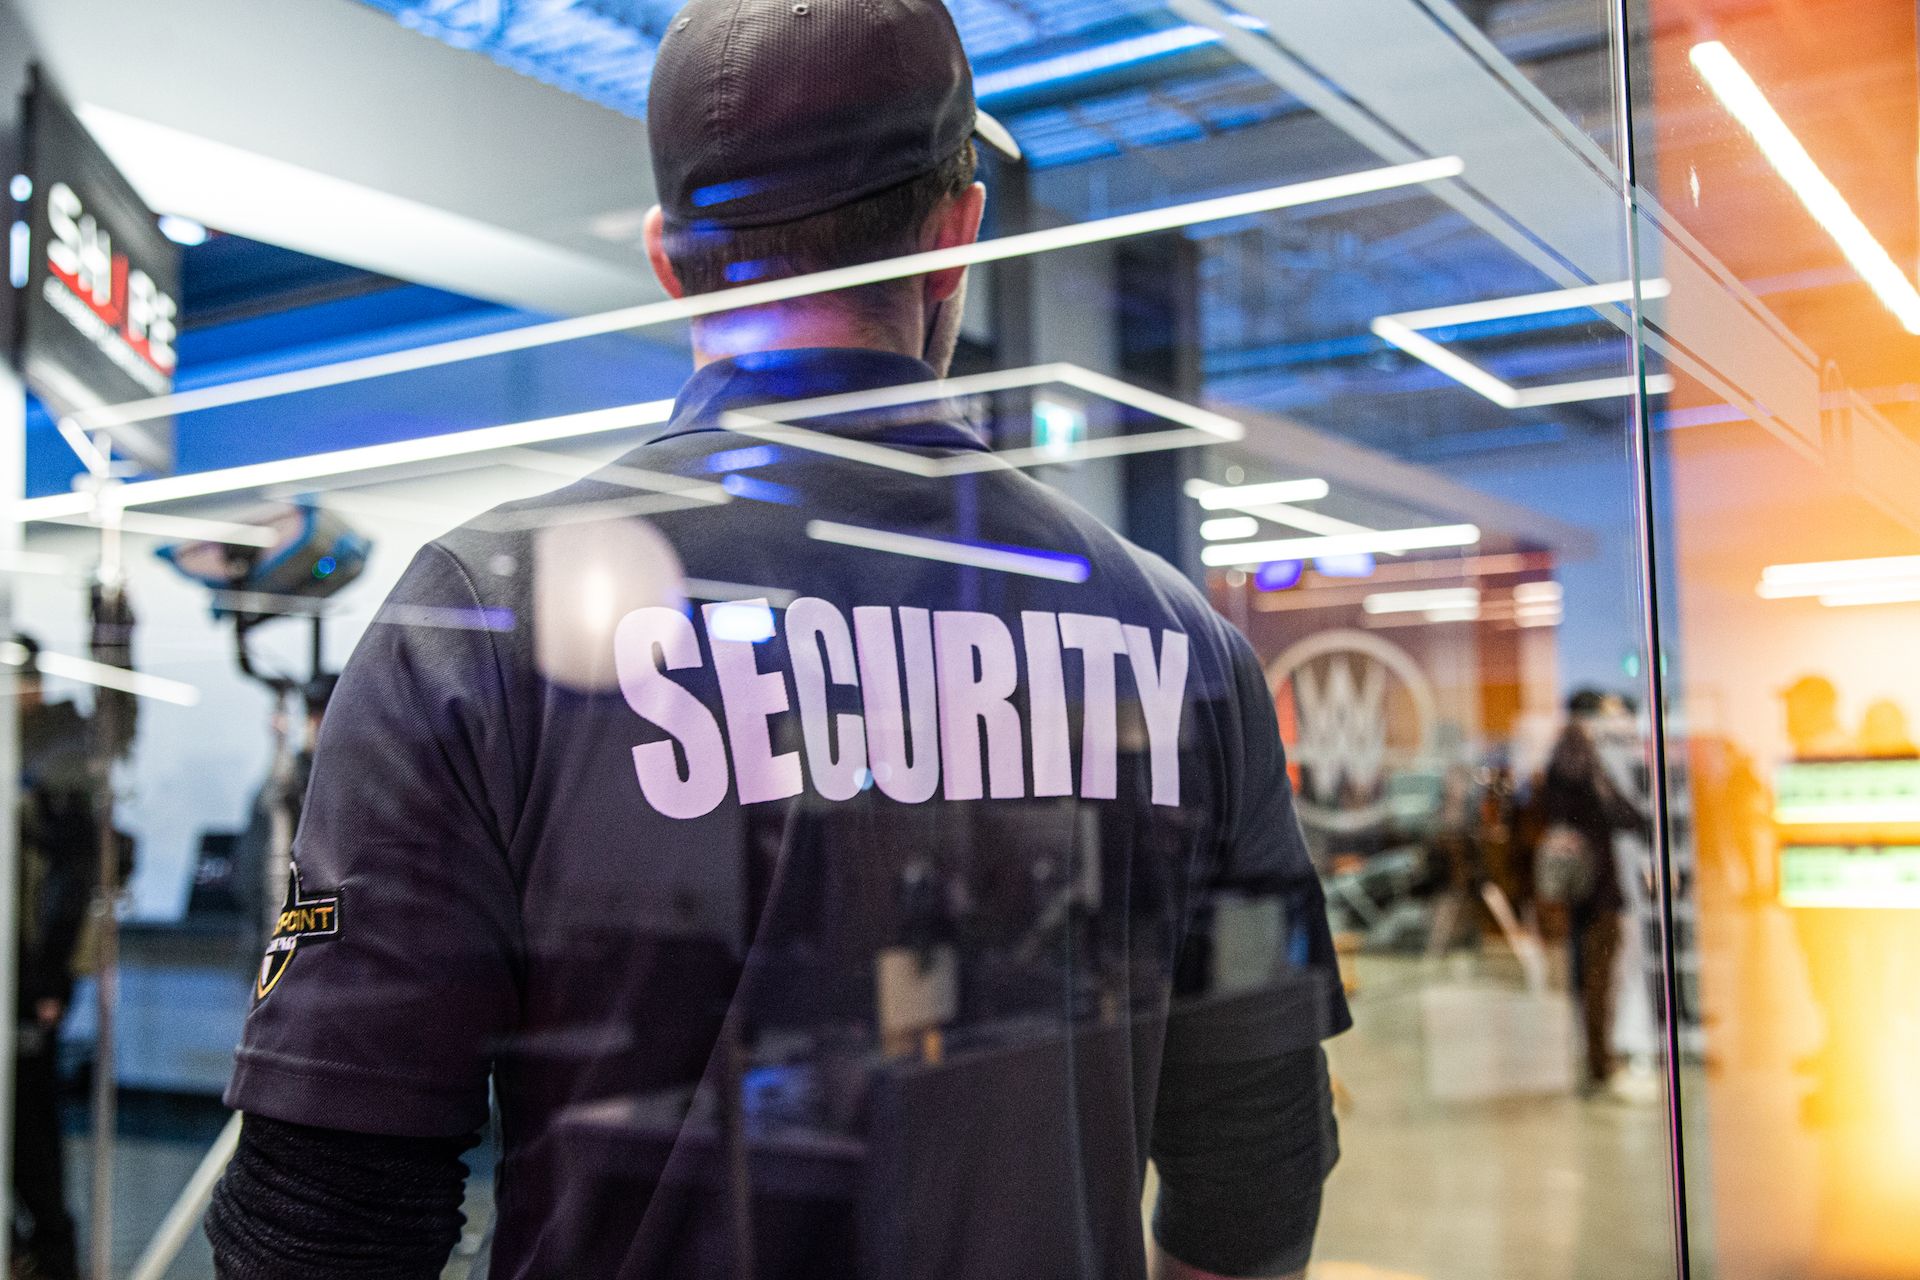 The back of a male Flex Point Security guard with "security" written in large print on the back of his shirt while he monitors activity at an event